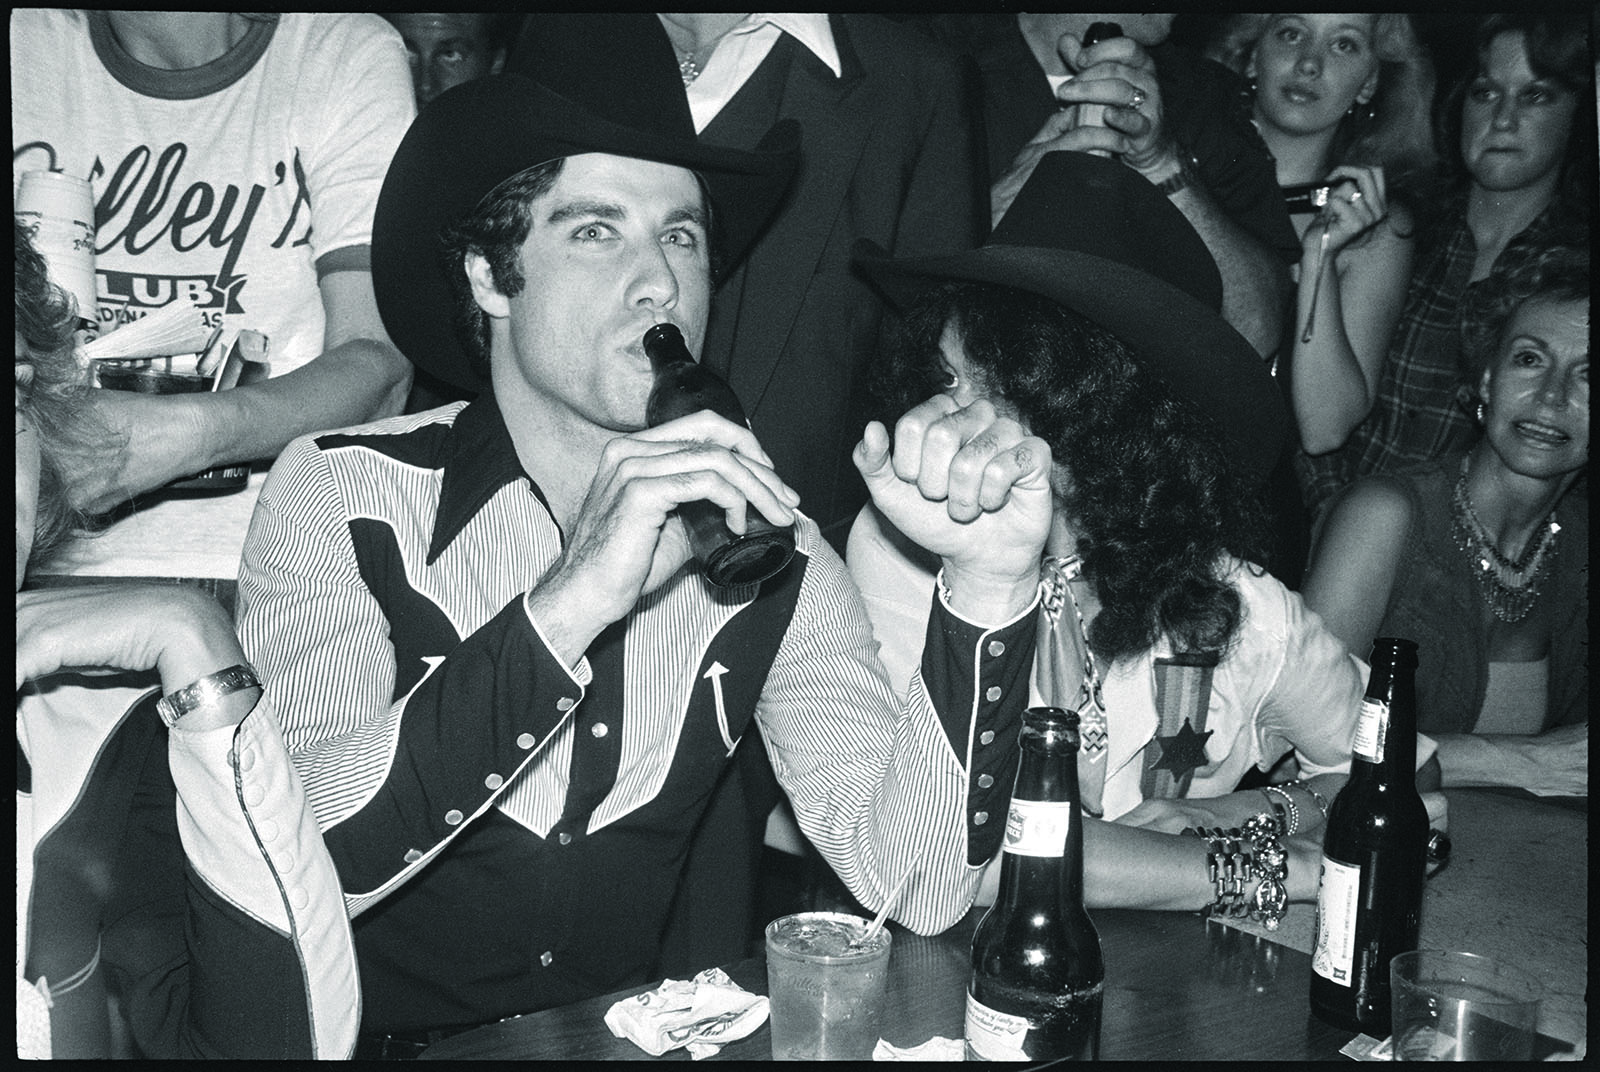 Andy Warhol (U.S.A., 1928–1987), Negative [Houston: John Travolta at the Urban Cowboy premier party at Gilley's], 1980, Black-and-white negatives. Cantor Arts Center collection, Gift of The Andy Warhol Foundation for the Visual Arts, 2014.41.2953_15. © The Andy Warhol Foundation for the Visual Arts, Inc.